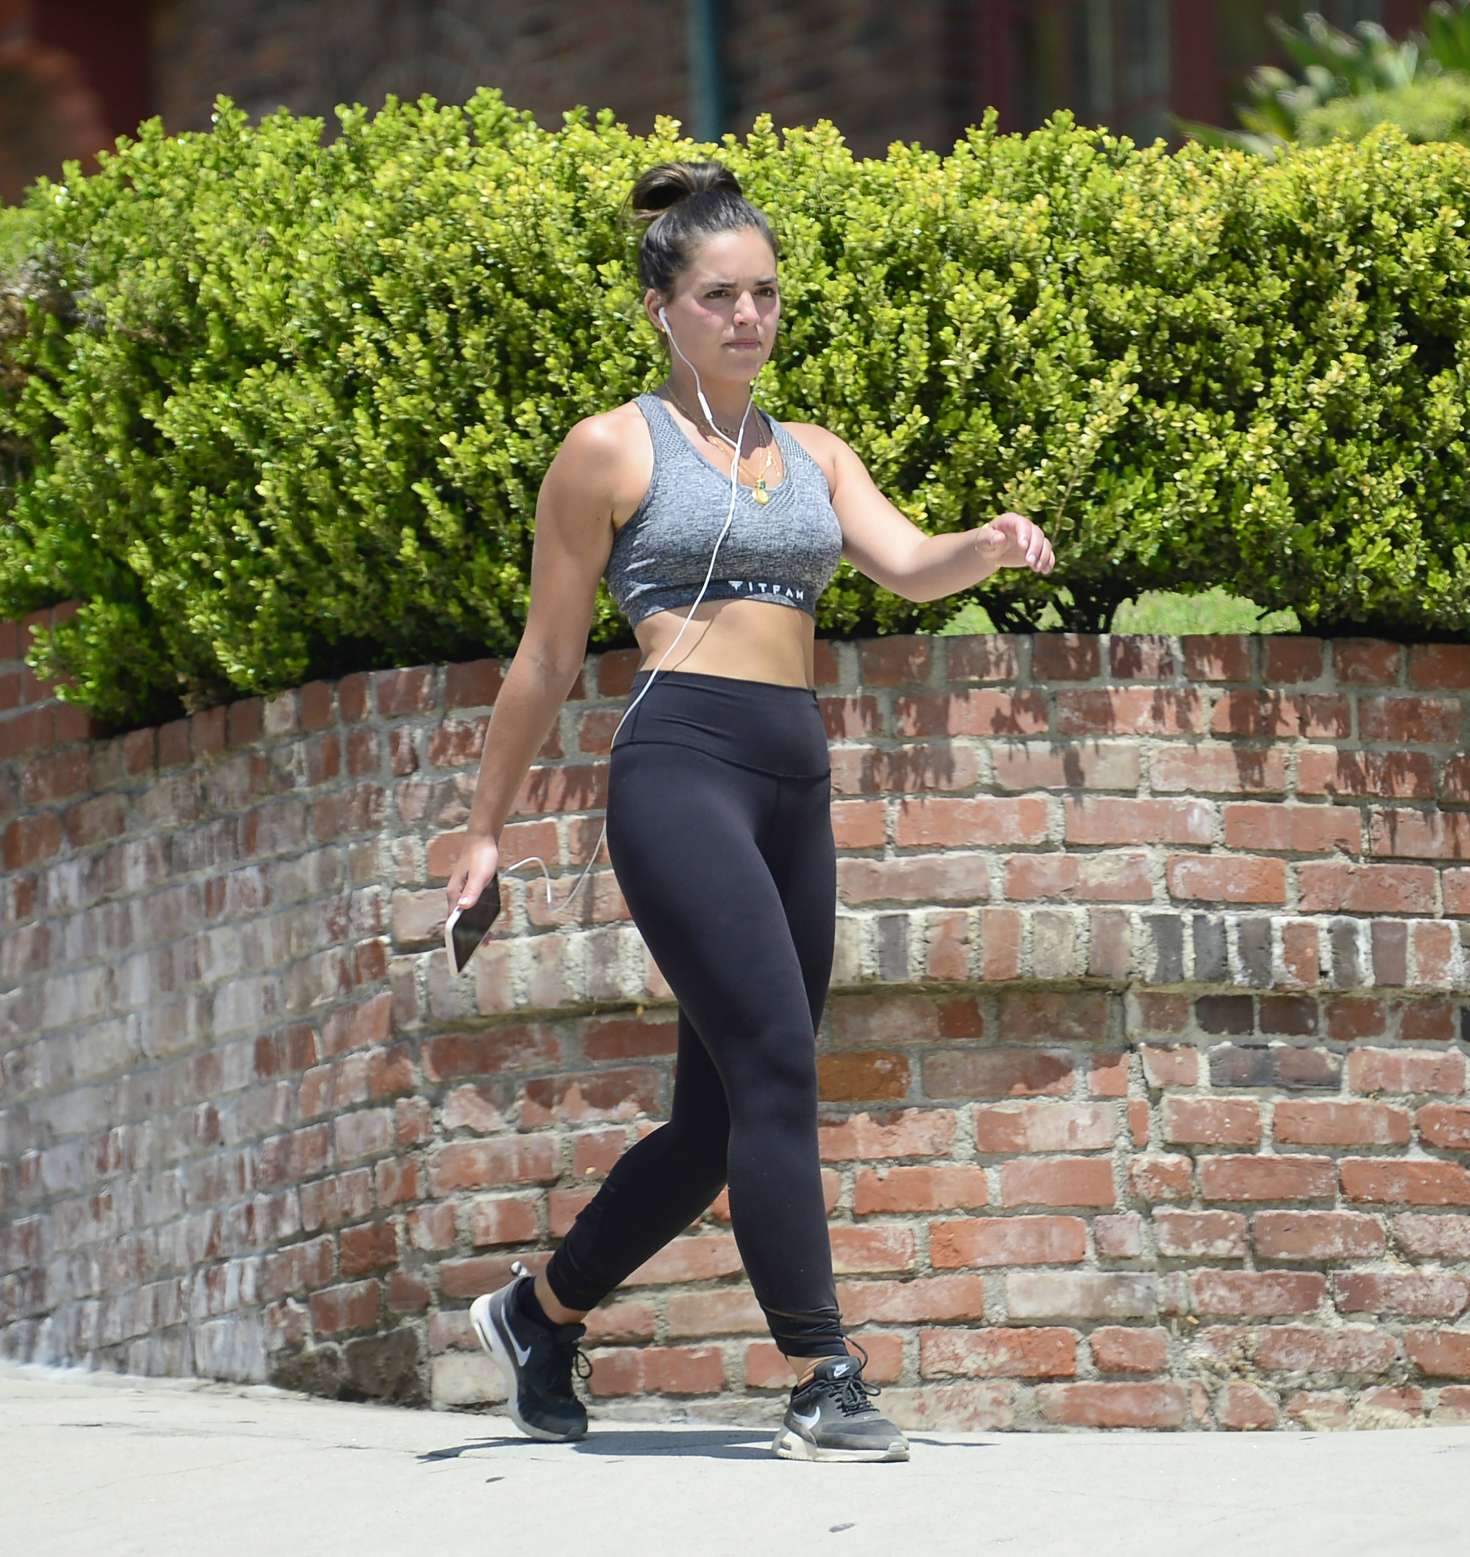 Olympia Valance in Tights at Runyon Canyon in LA